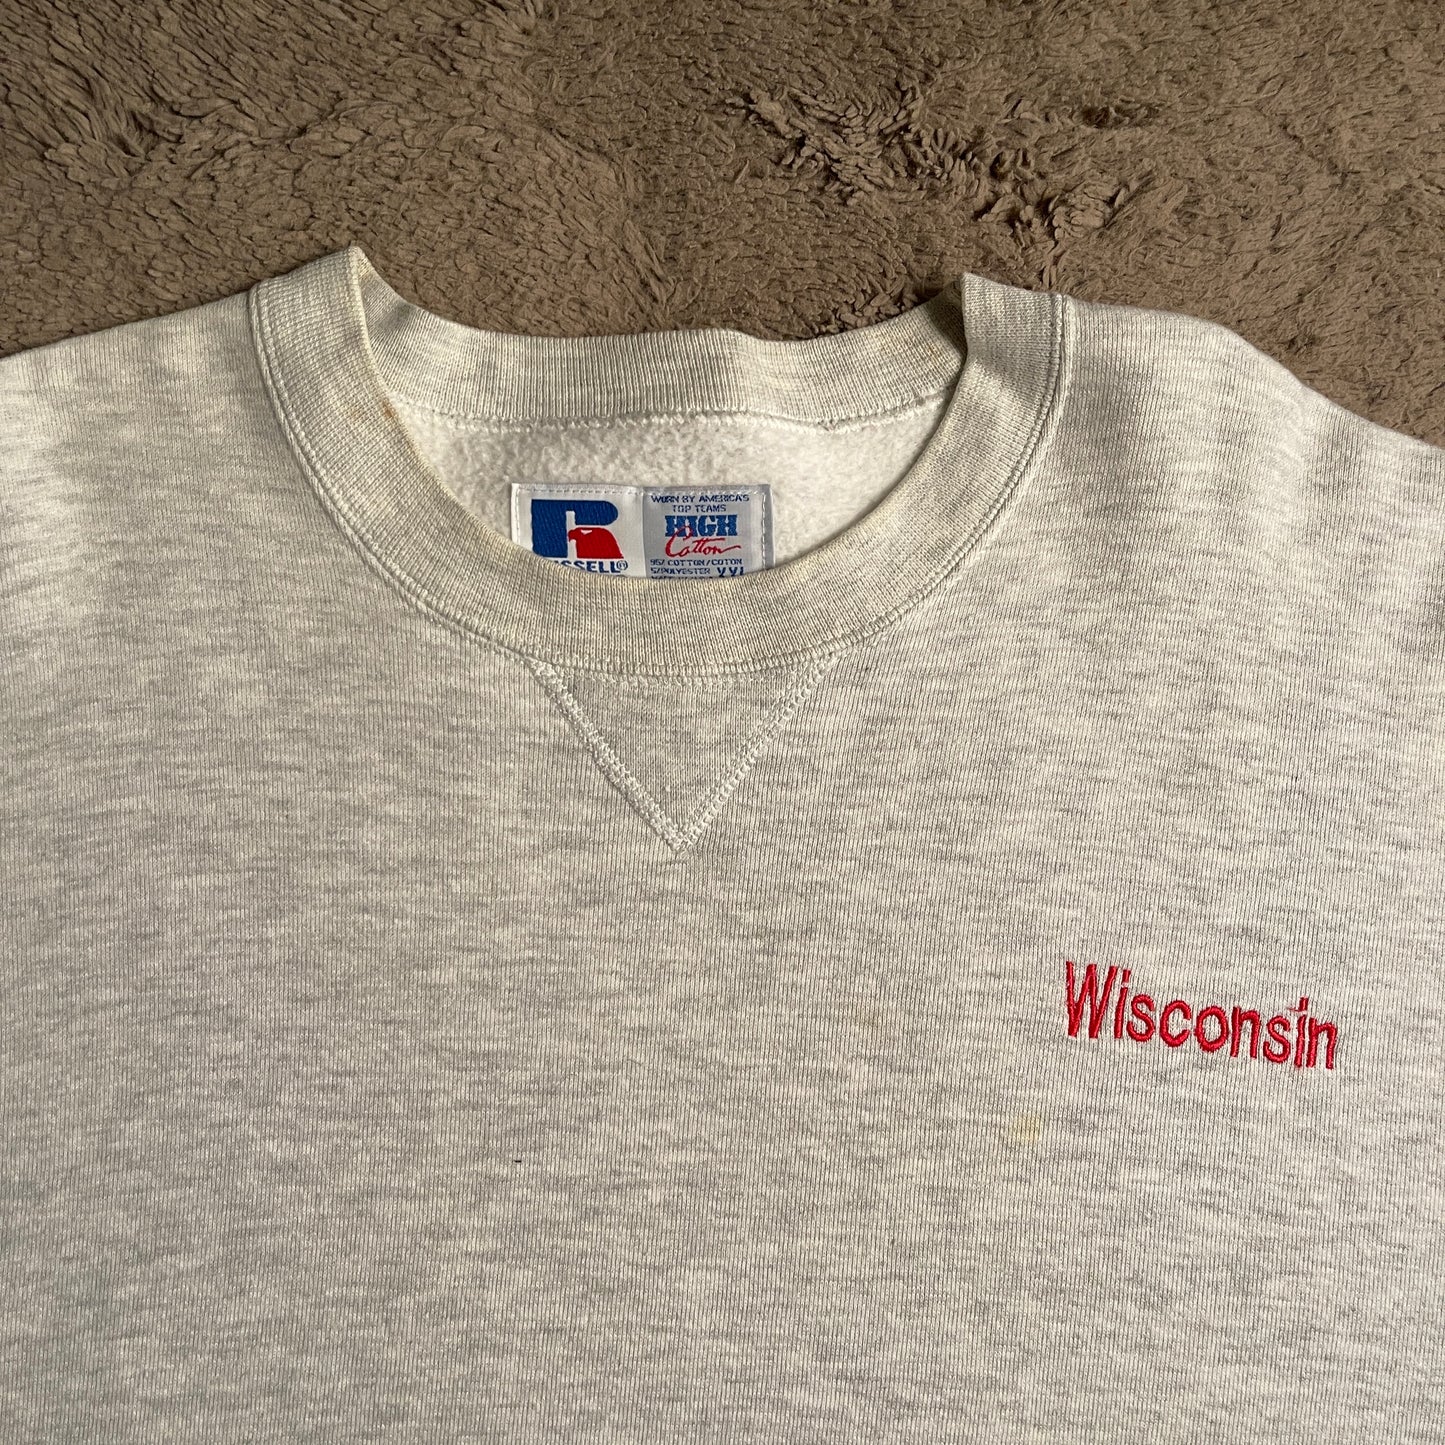 Russell Athletic Wisconsin Crewneck (2XL)